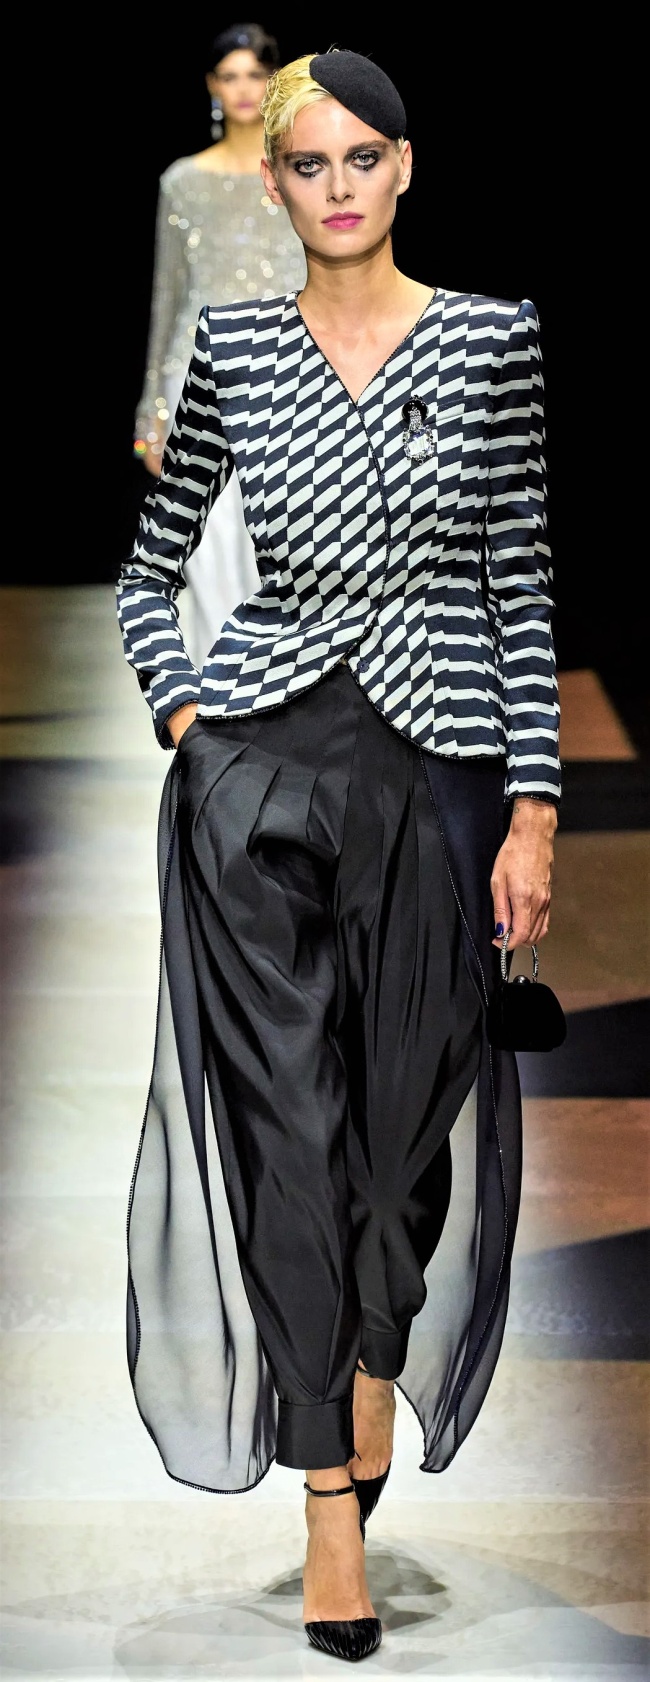 HC armani-prive-fall-2022-couture-credit-gorunway blk wht (2) cropped.jpg